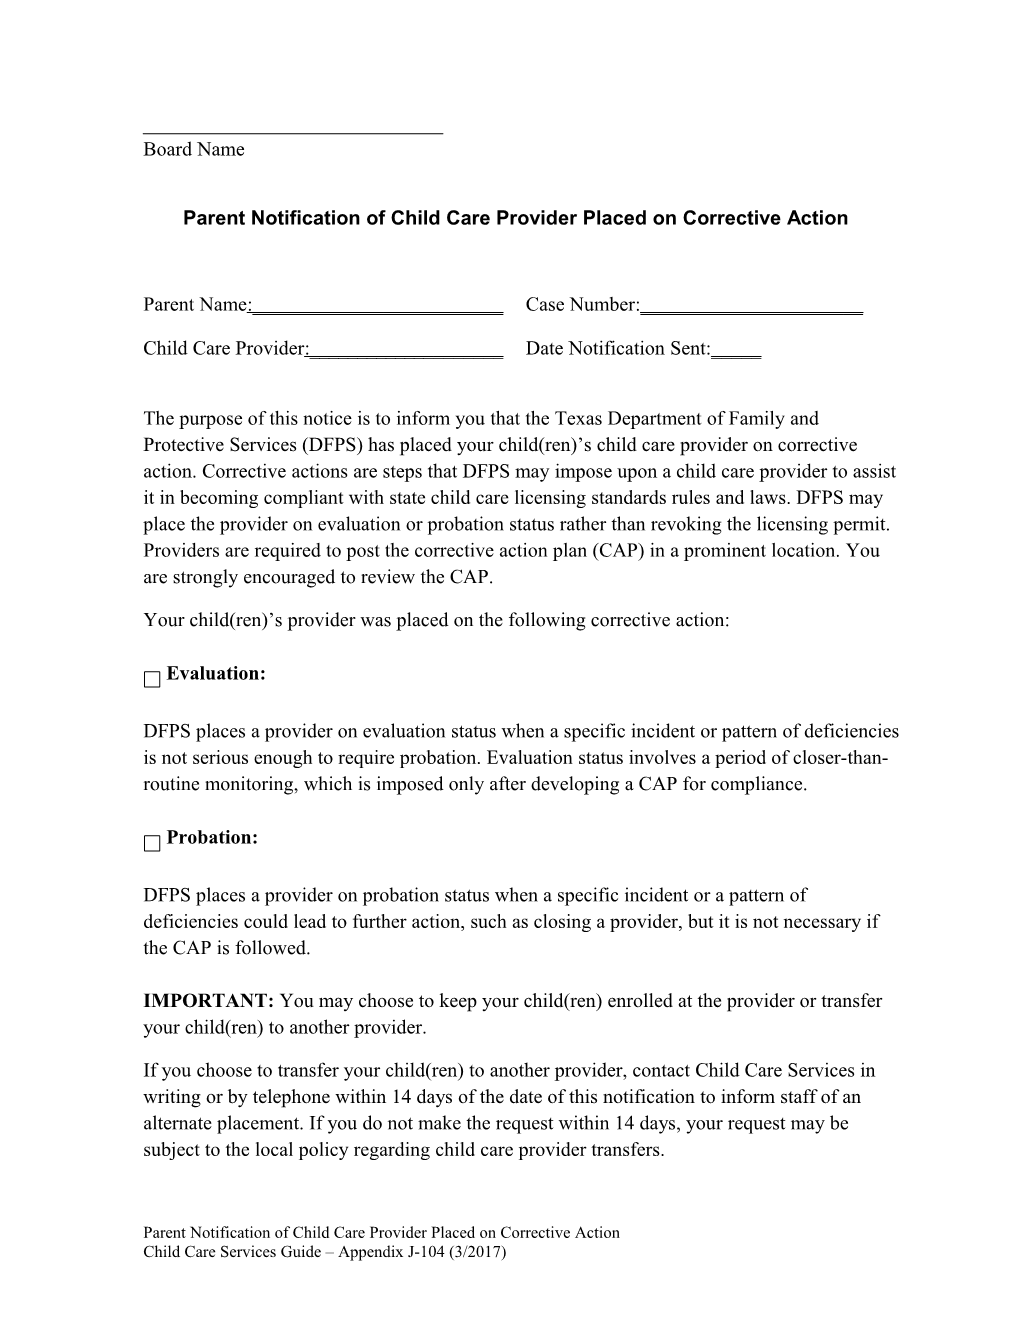 Parent Notification of Child Care Provider Placed on Corrective Action